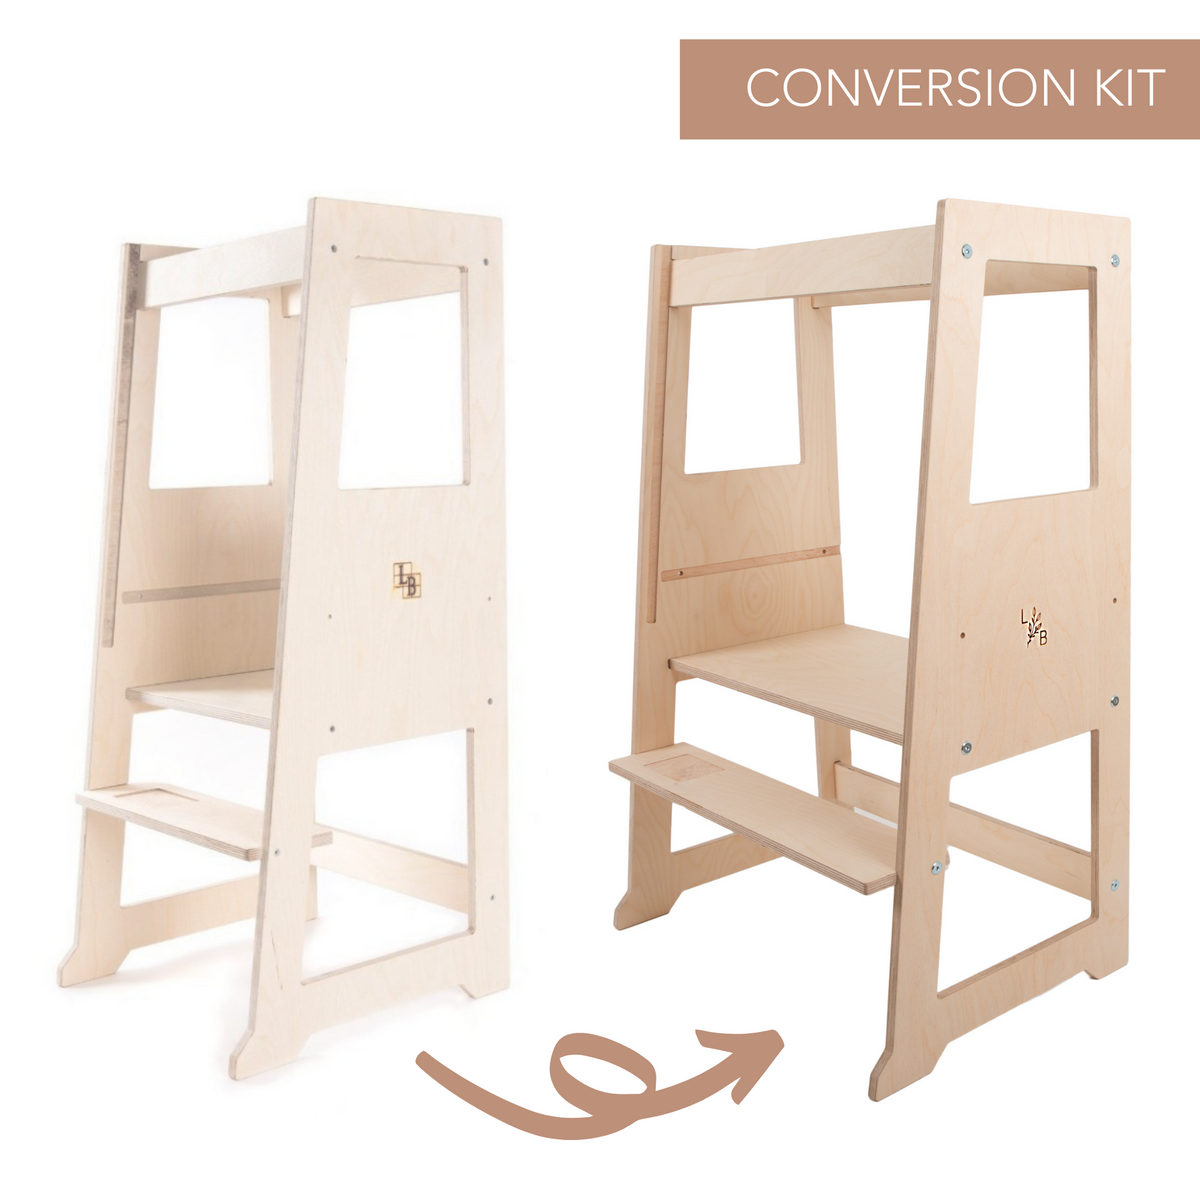 Single to Double Learning Tower Conversion Kit